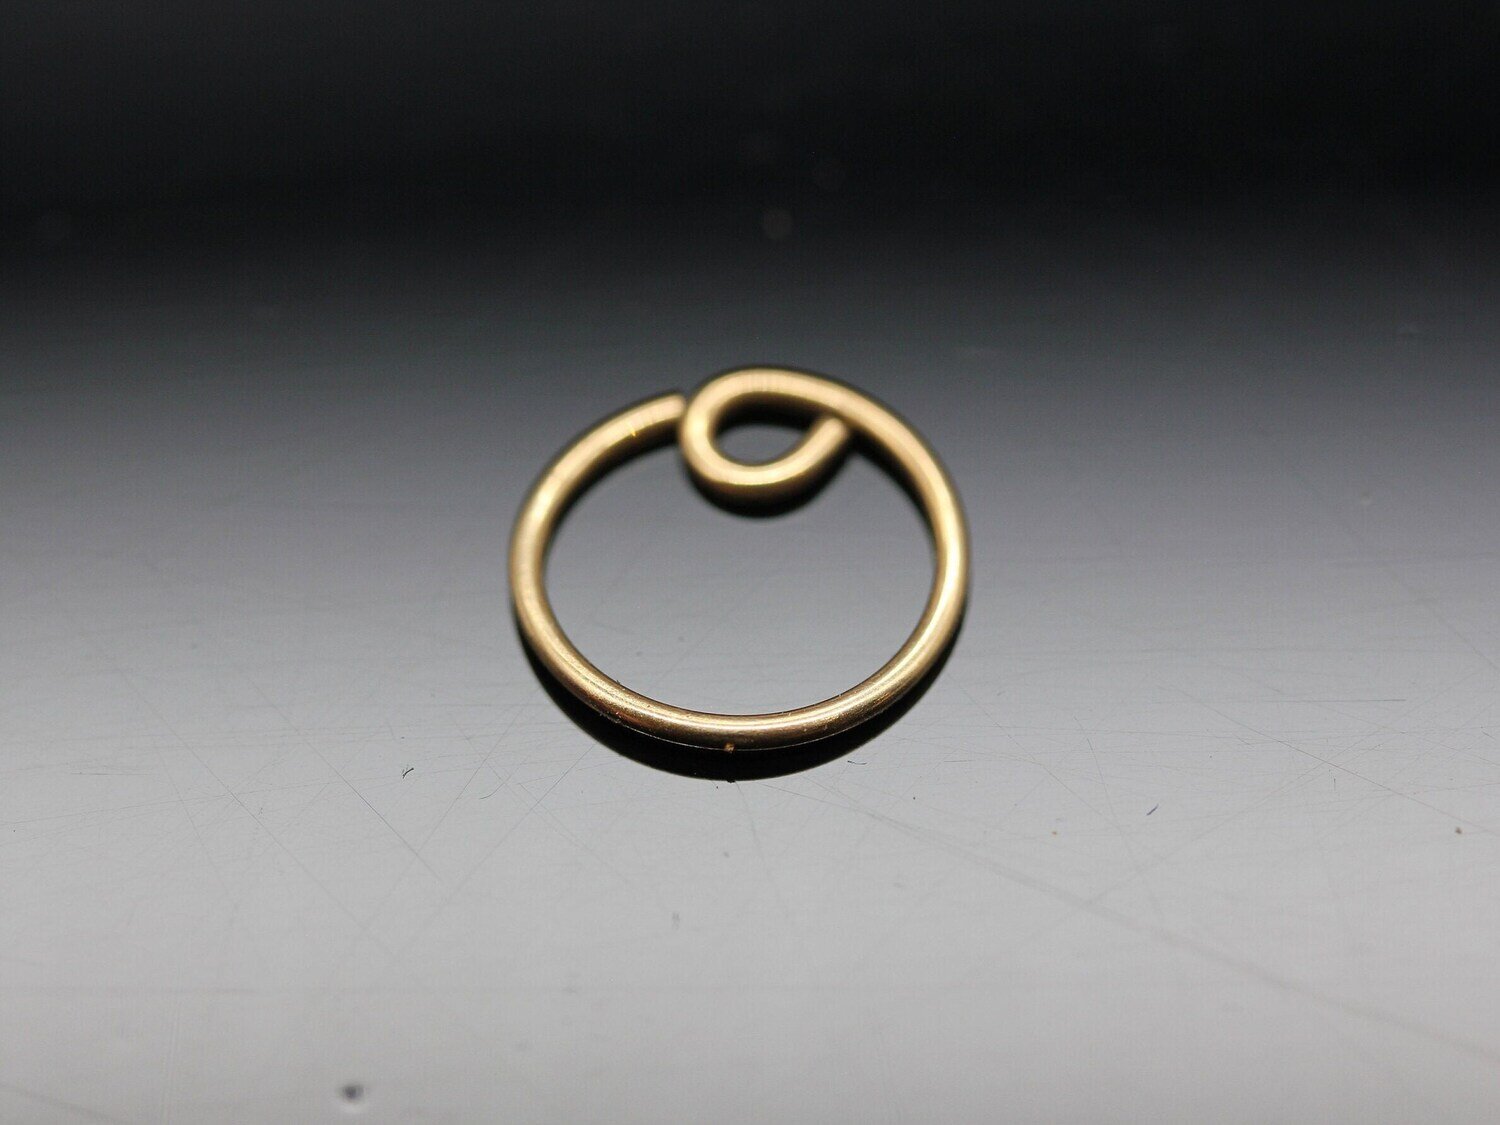 20g Solid Gold (NOT plated or filled) Seamless Ring with loop detail